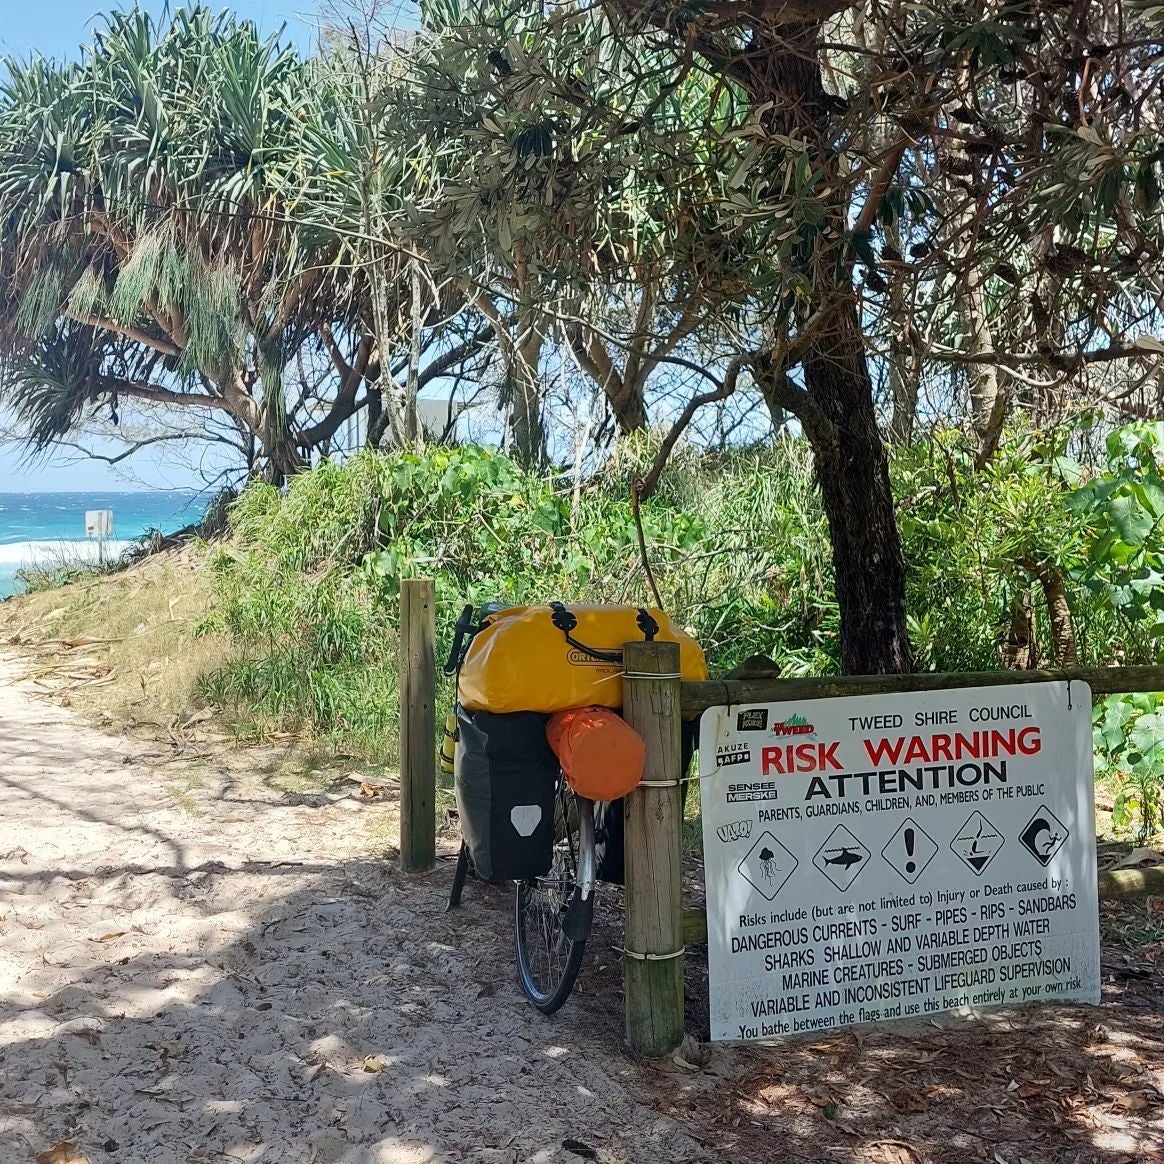 A Bicycle With Multiple Bags Attached To Its Back, Resting Under A Sign That Reads: &Quot;Risk Warning Attention. Parents, Guardians, Children And Member Of The Public. Dangerous Currents - Surf - Pipes - Rips - Sandbars - Sharks - Shallow And Variable Depth Water - Marine Creatures - Submerged Objects - Variable And Inconsistent Lifeguard Supervision. Your Bathe Between The Flags And Use This Beach Entirely At Your Own Risk&Quot;